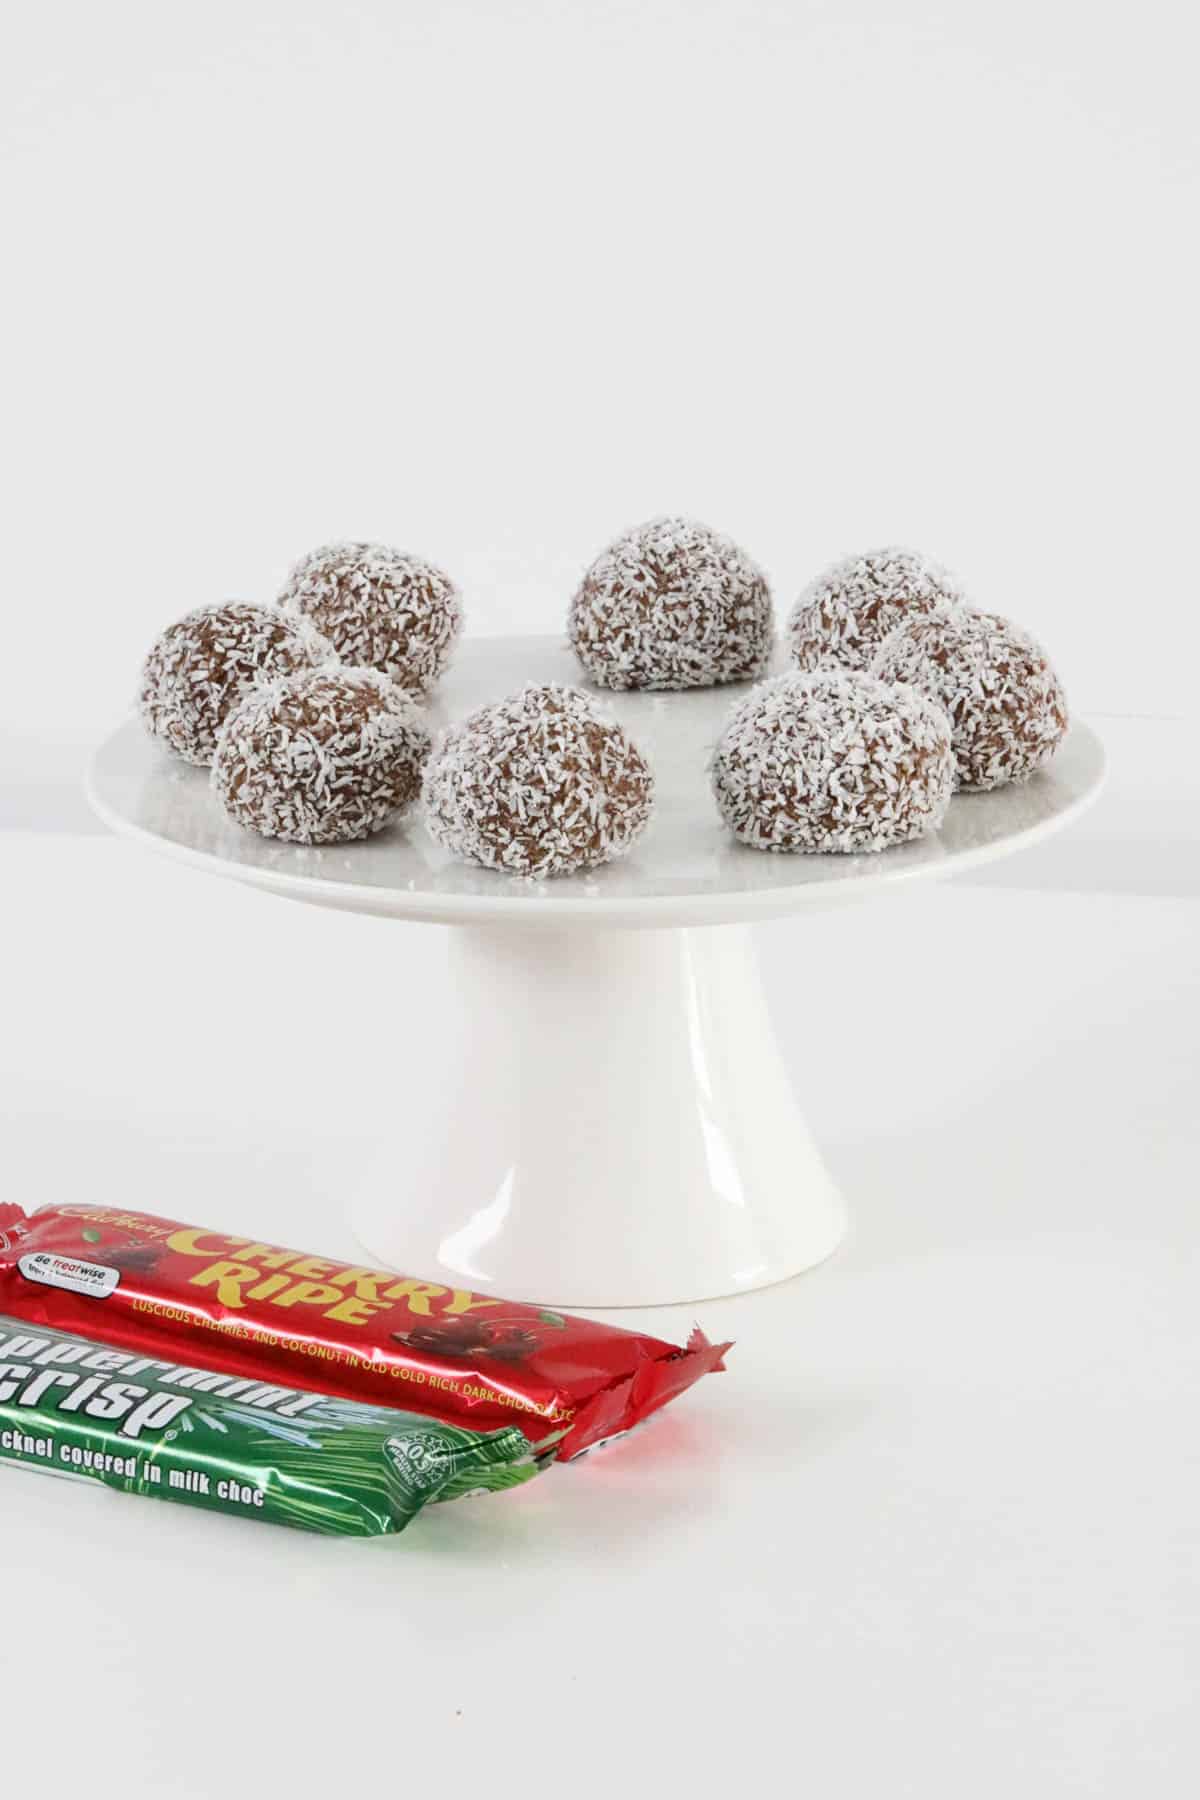 A cake stand topped with chocolate coconut balls.